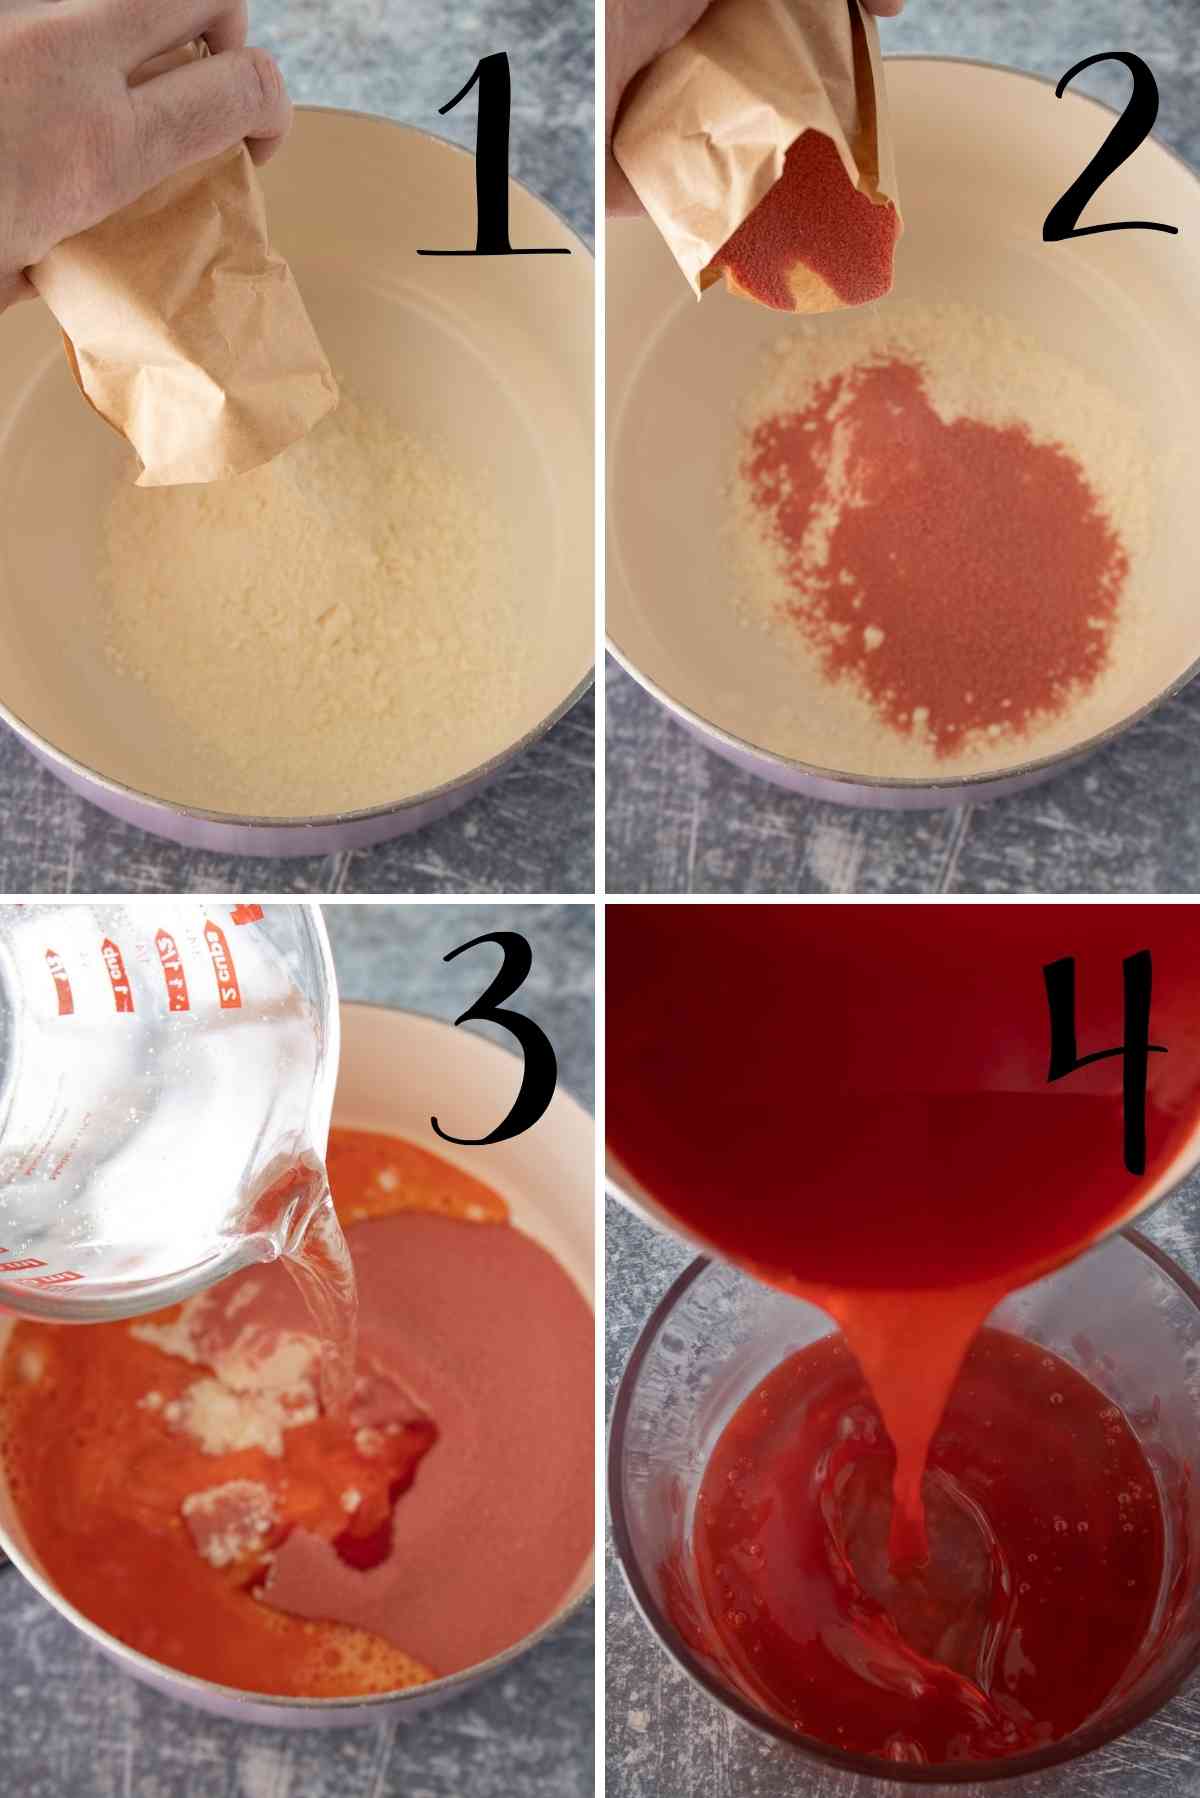 Pudding mix, jello mix and water boiled and poured into a bowl.